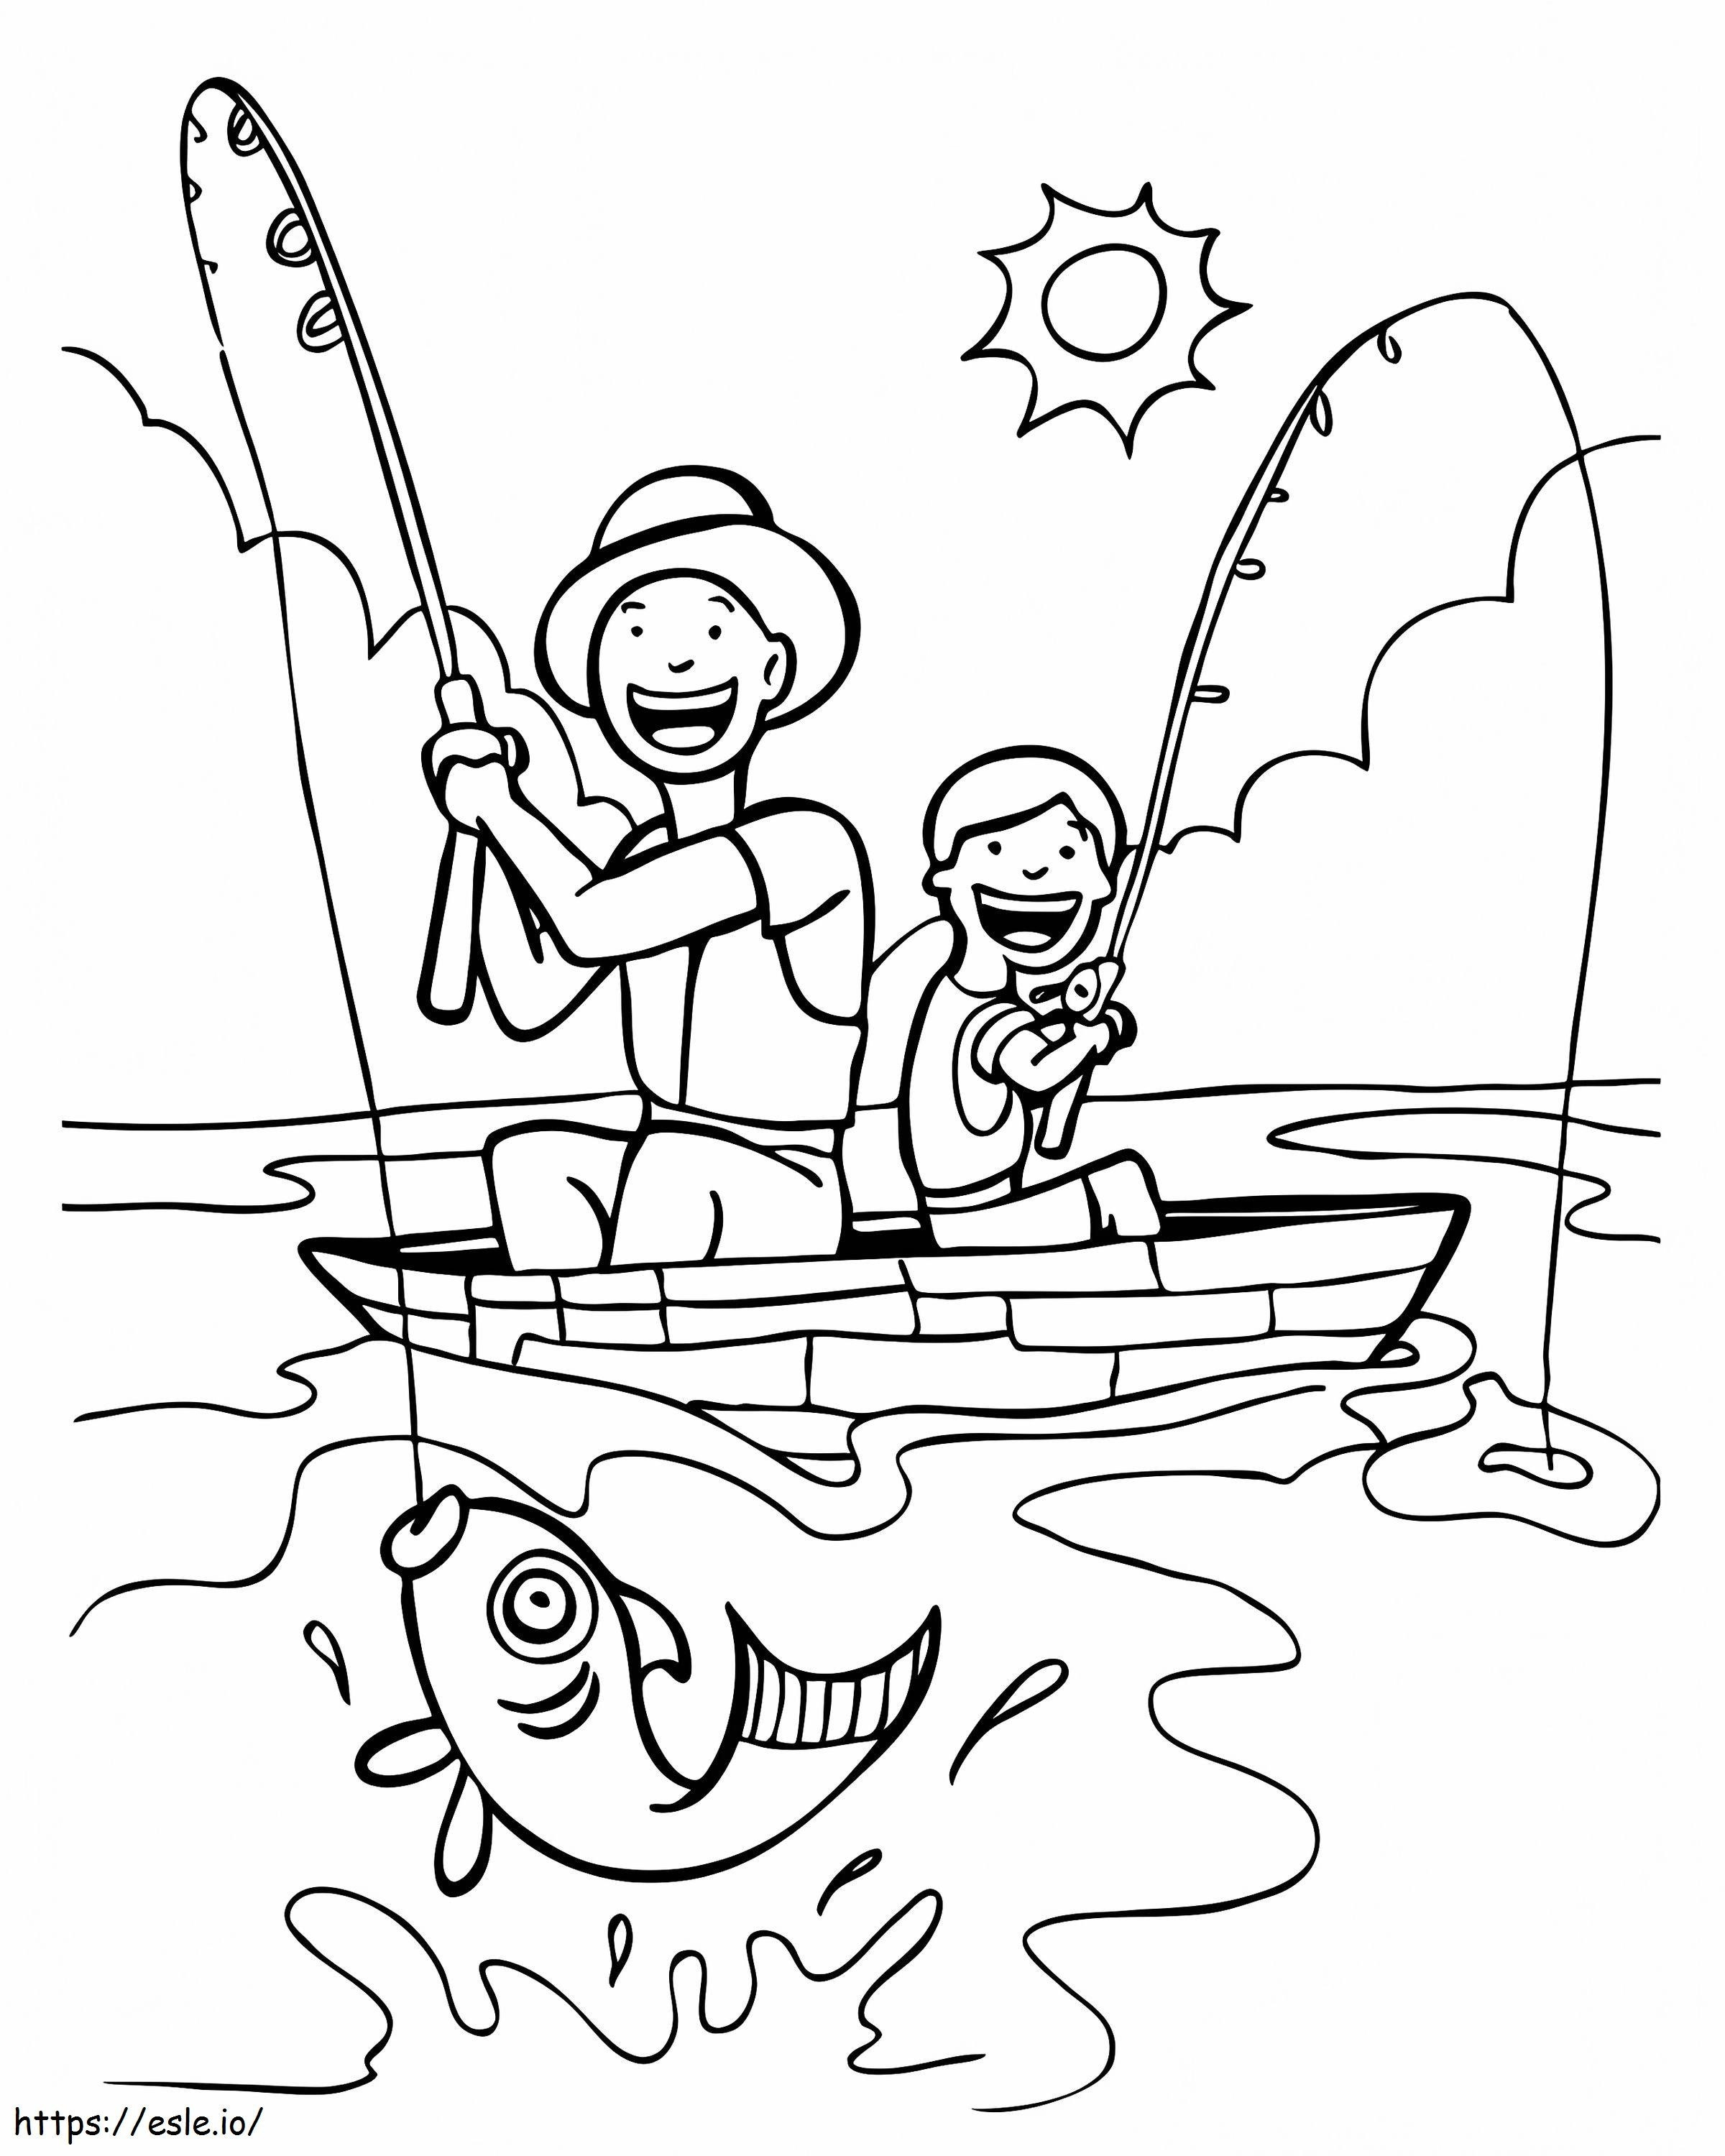 Funny Fishing coloring page